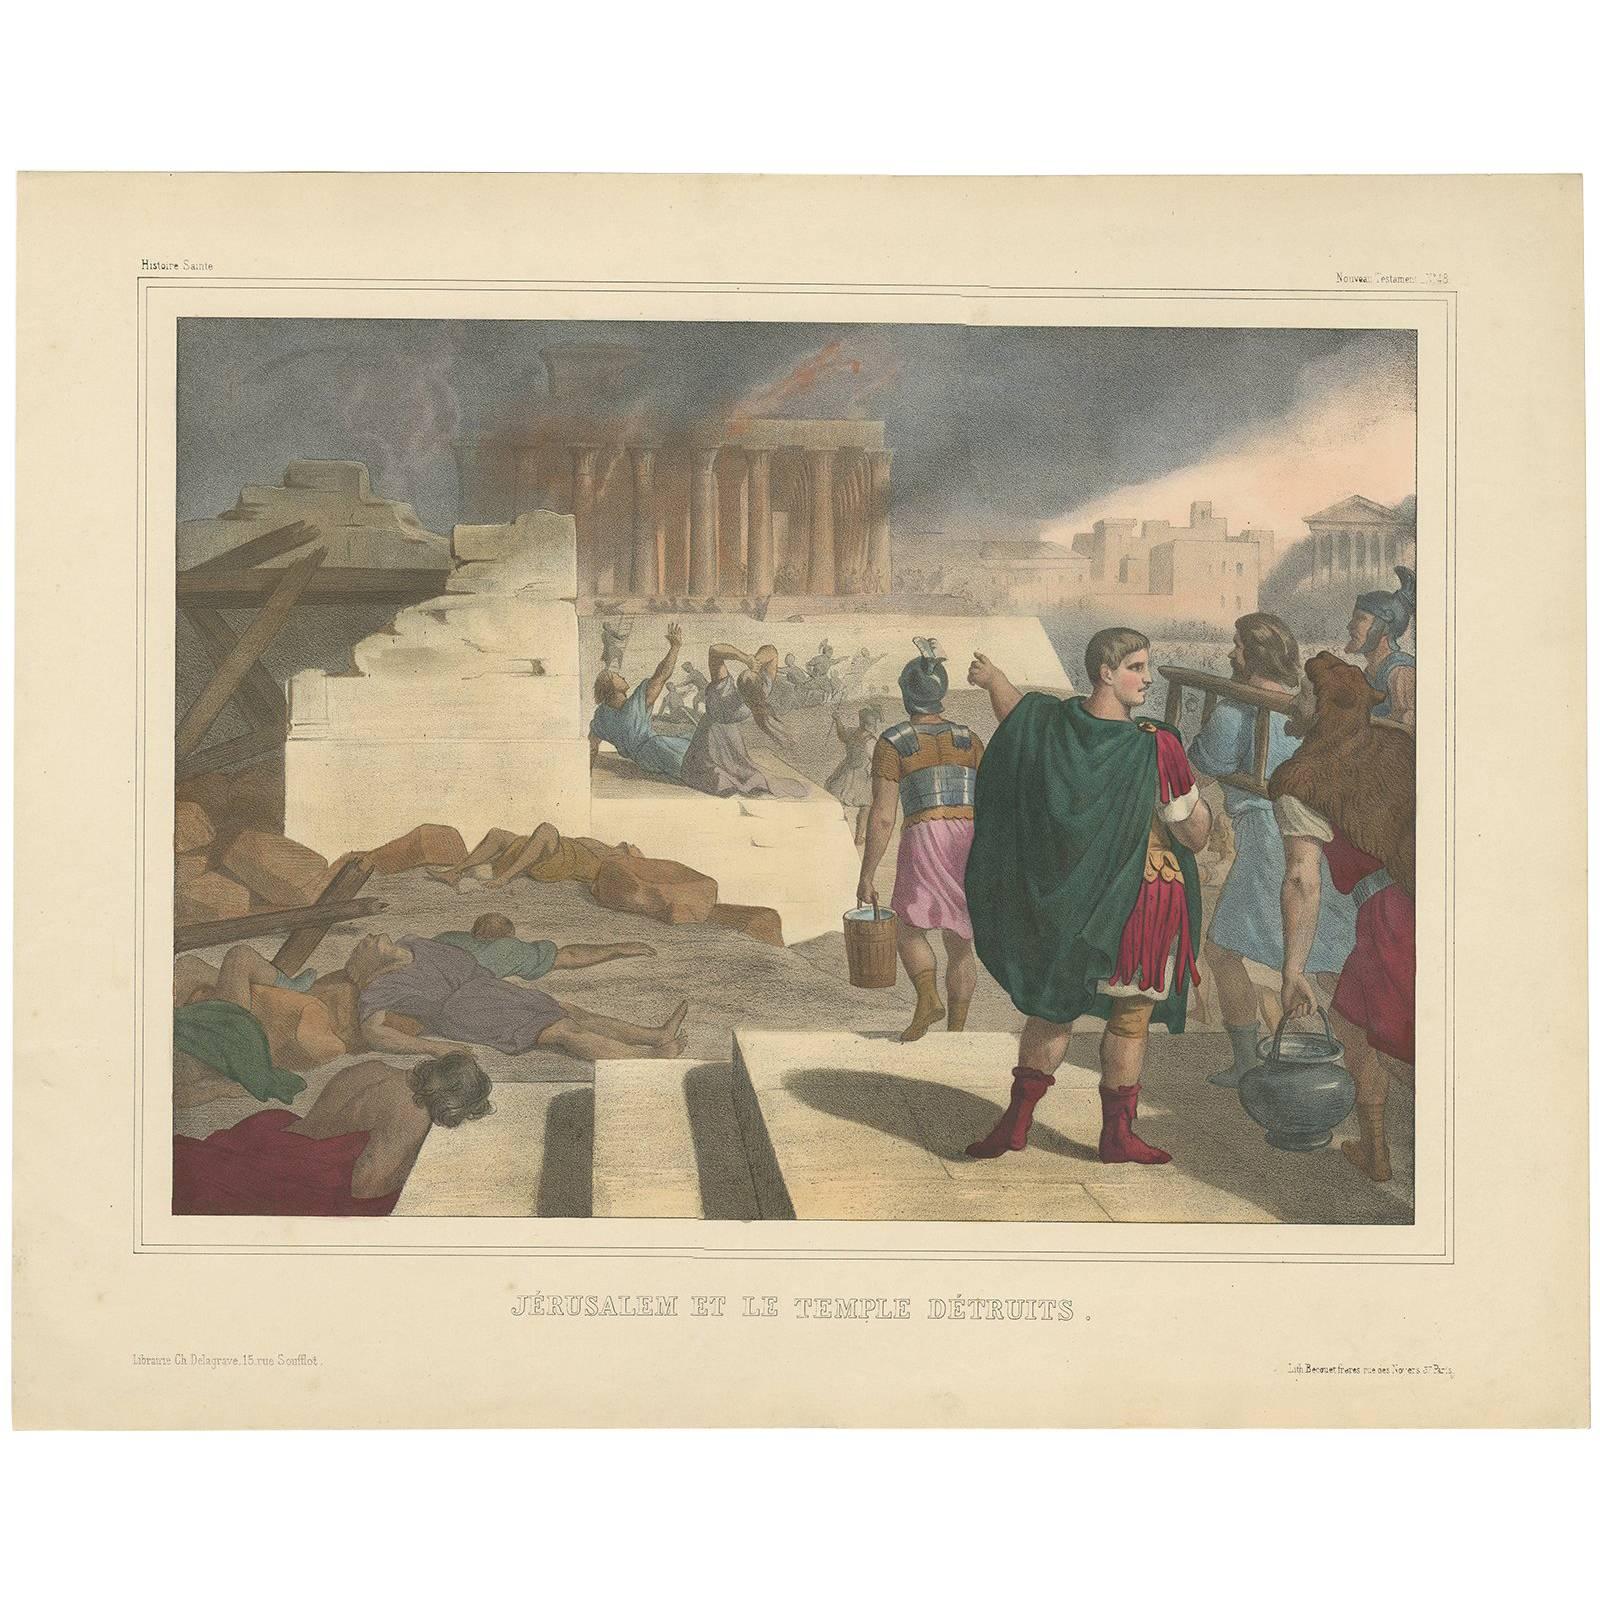 Antique Religious Print "No. 48" Jerusalem and the Destroyed Temple, circa 1840